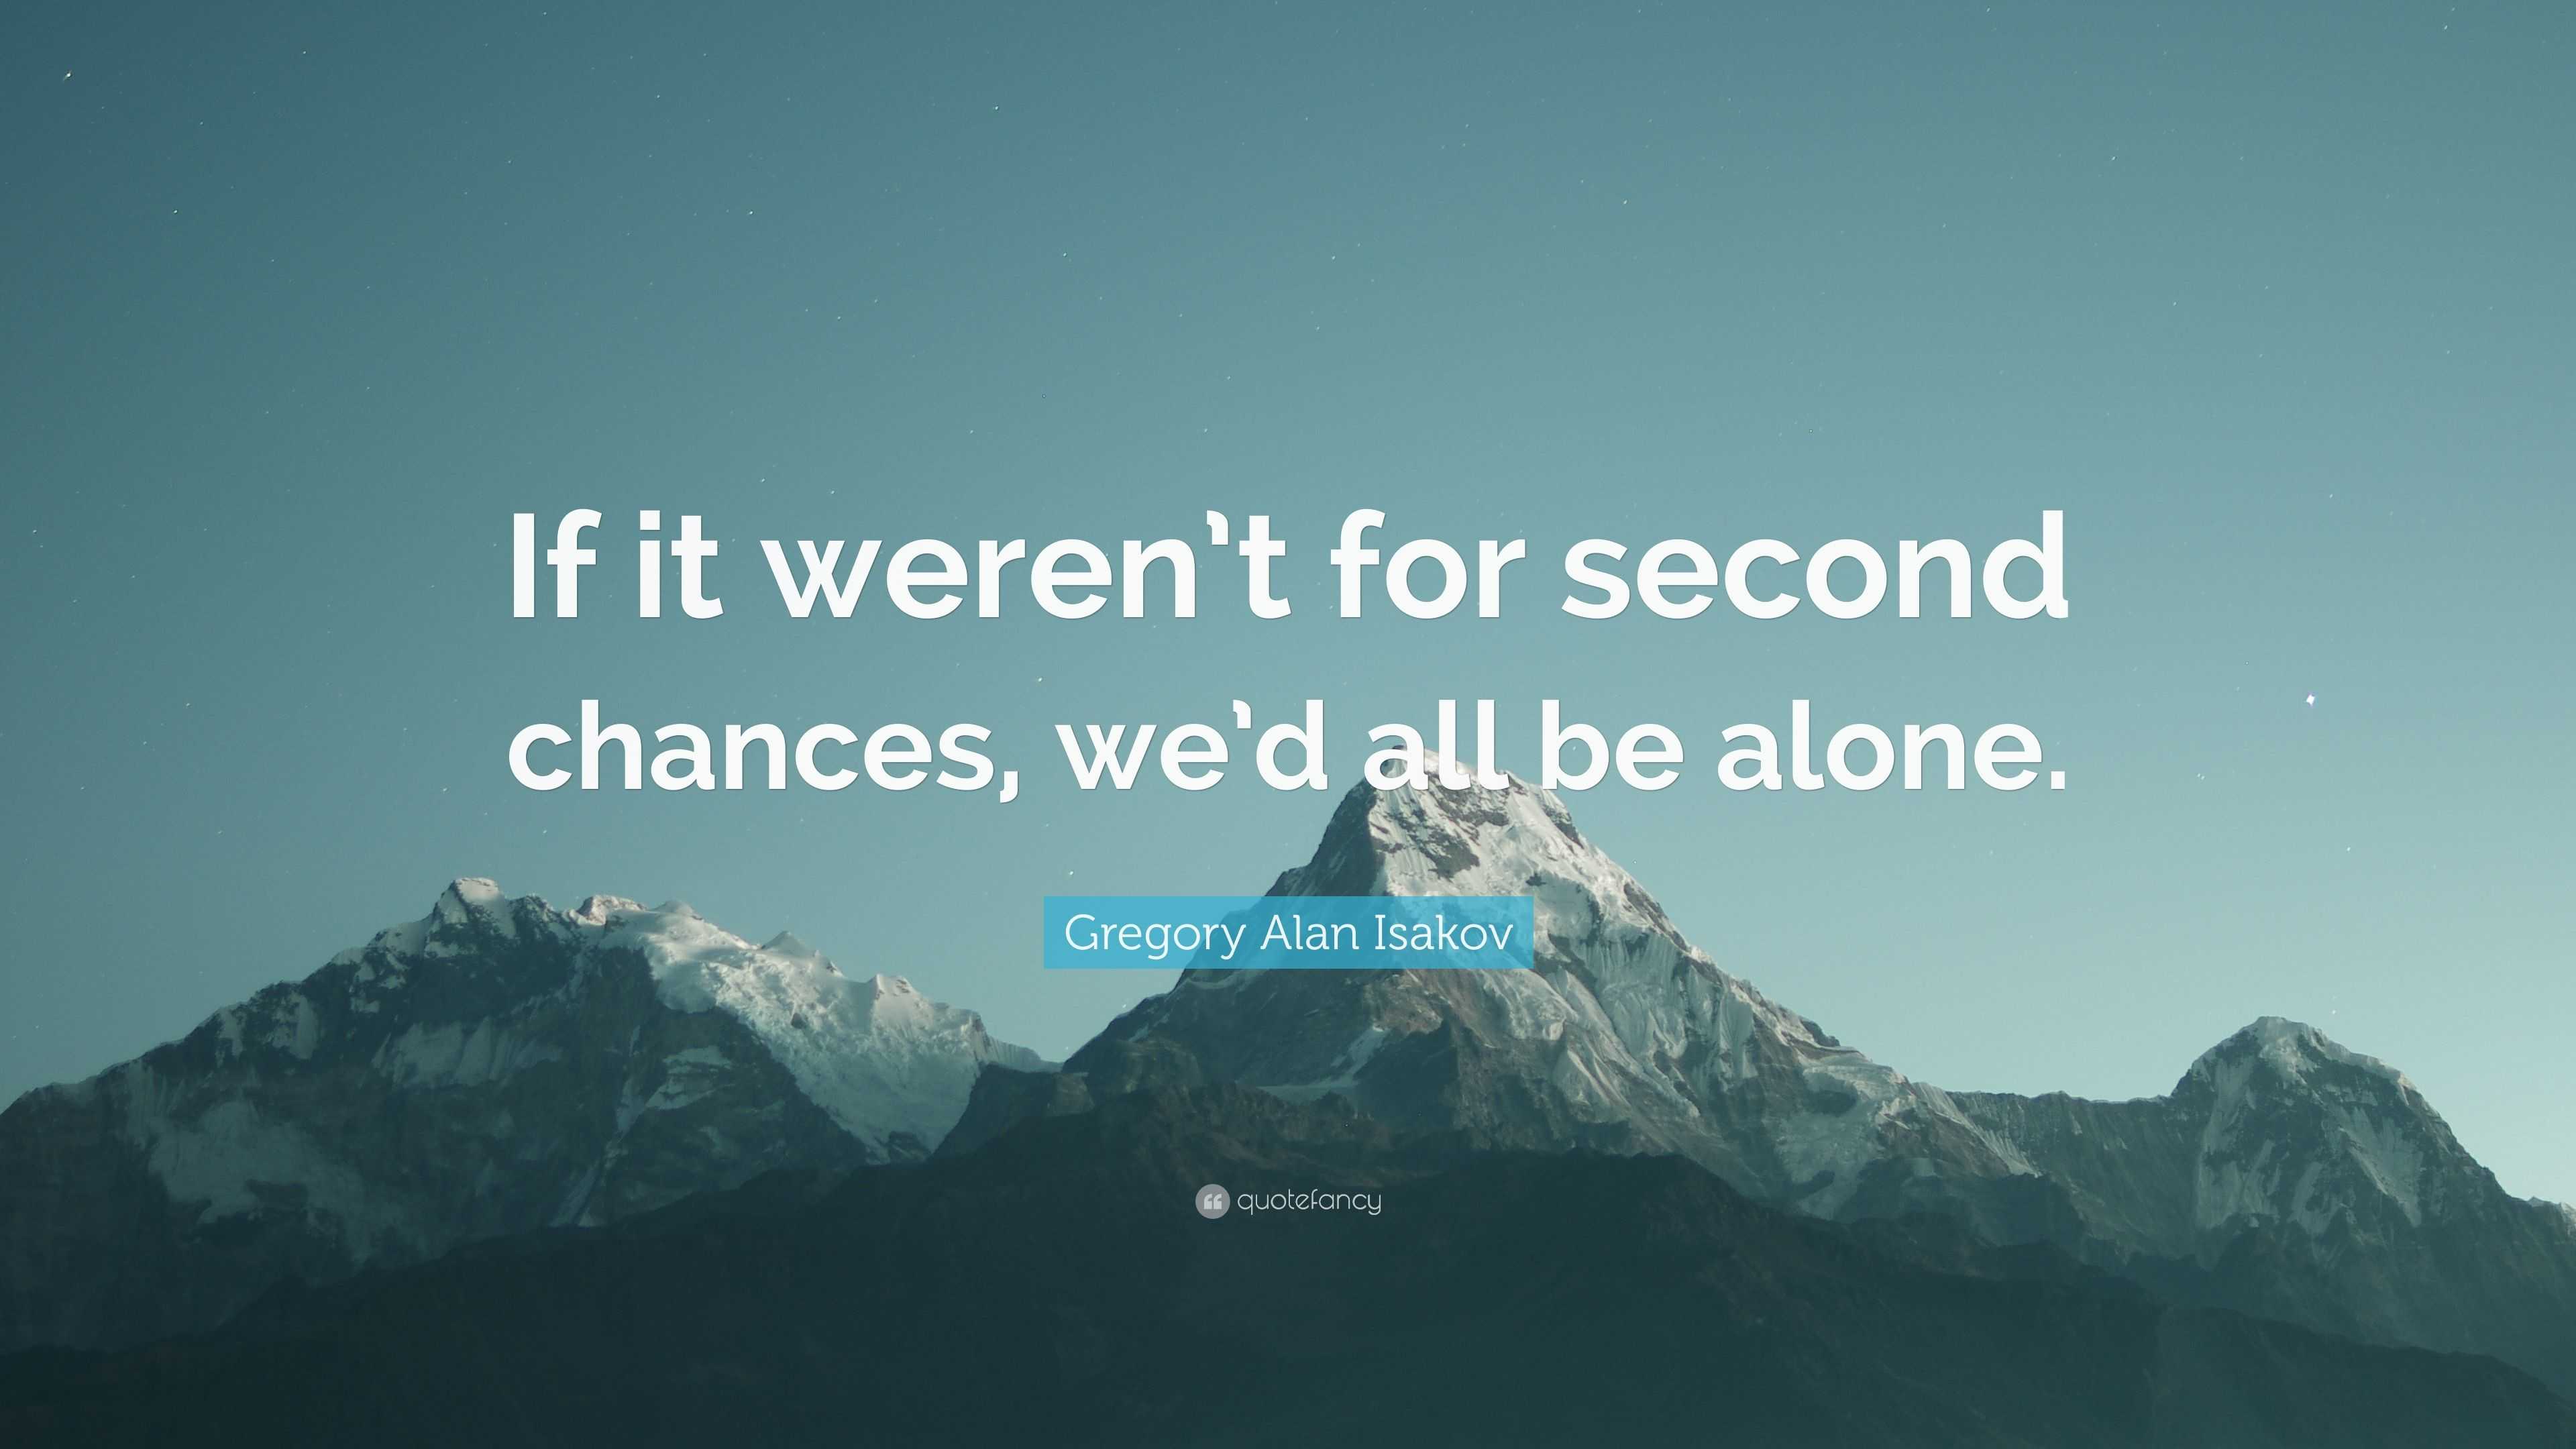 Gregory Alan Isakov Quote: “If it weren’t for second chances, we’d all ...